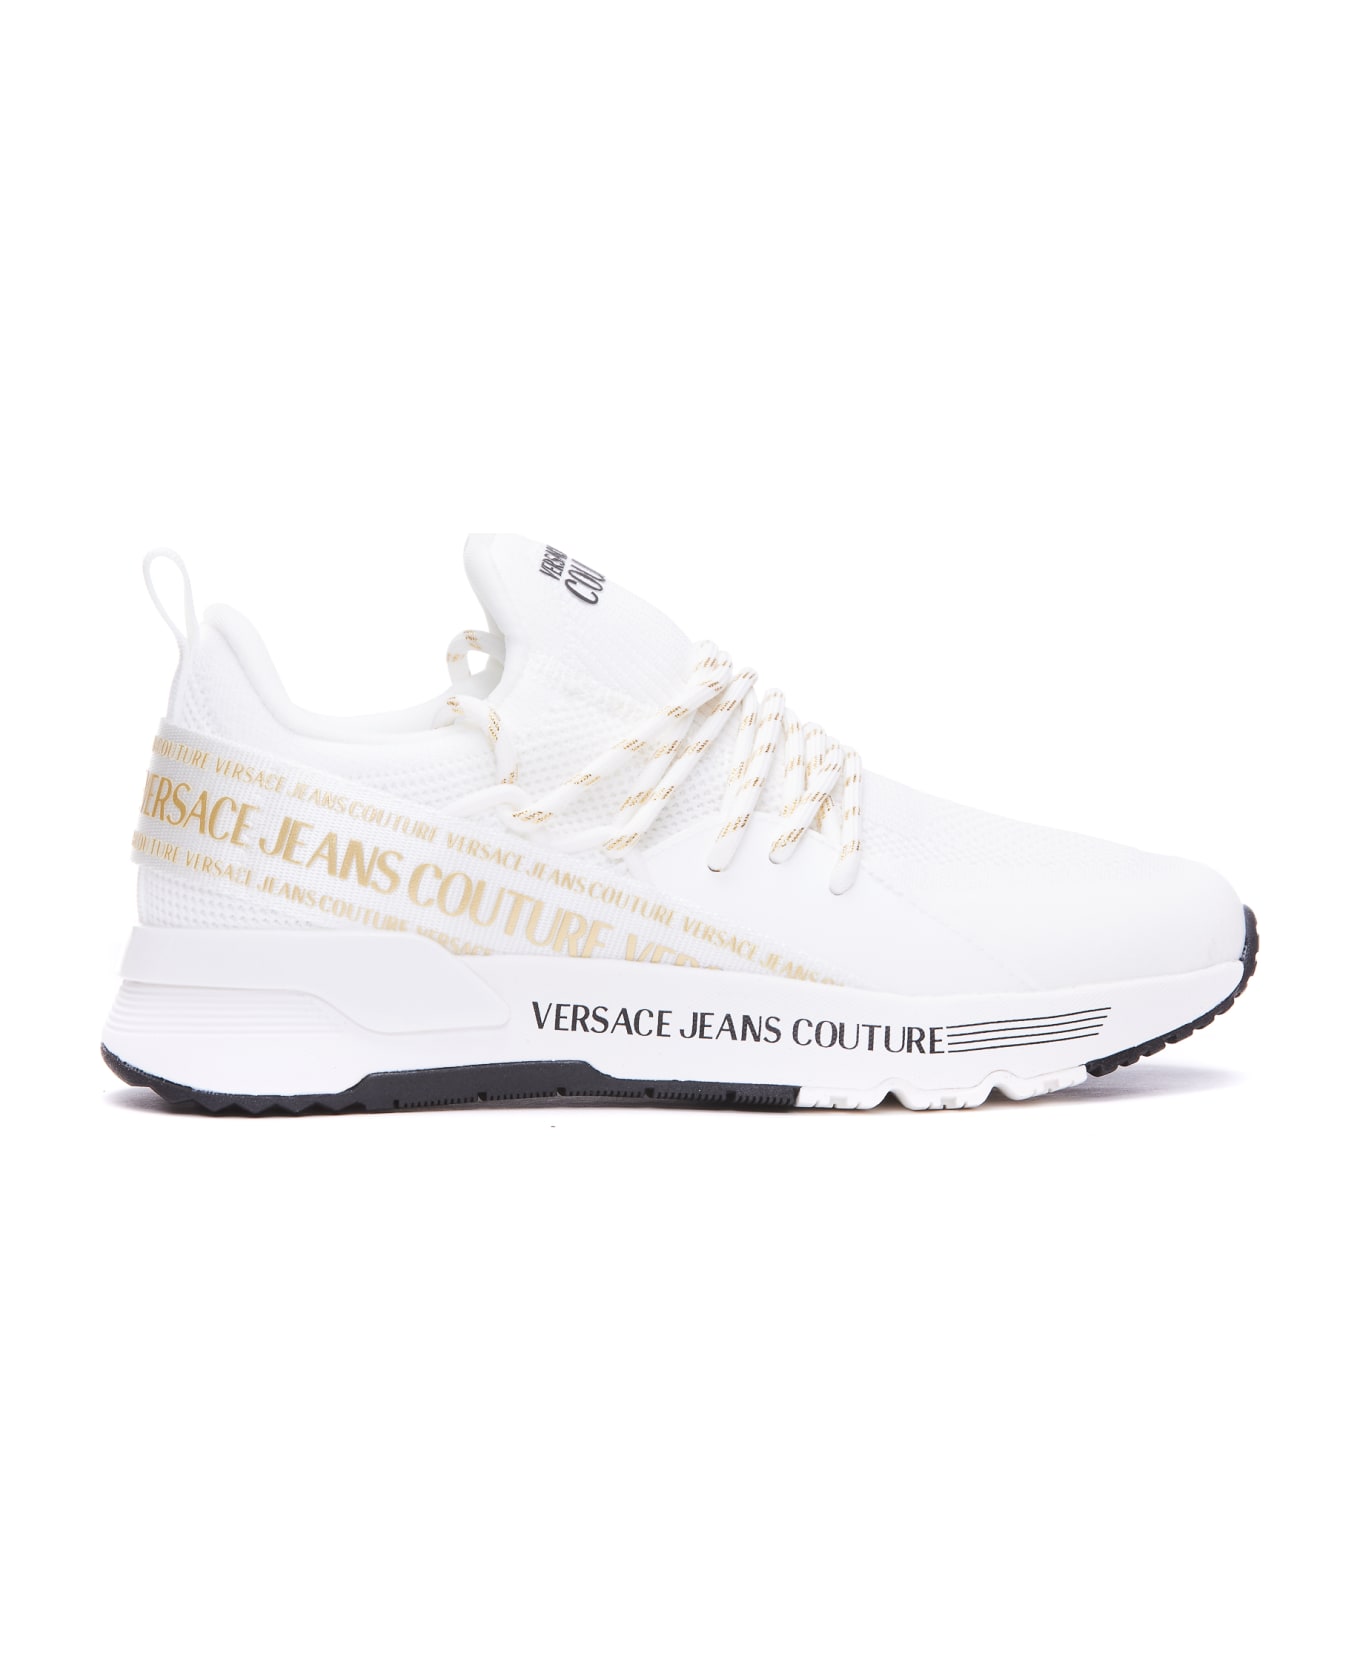 Versace Jeans Couture Dynamic Sneakers - WHITE GOLD スニーカー